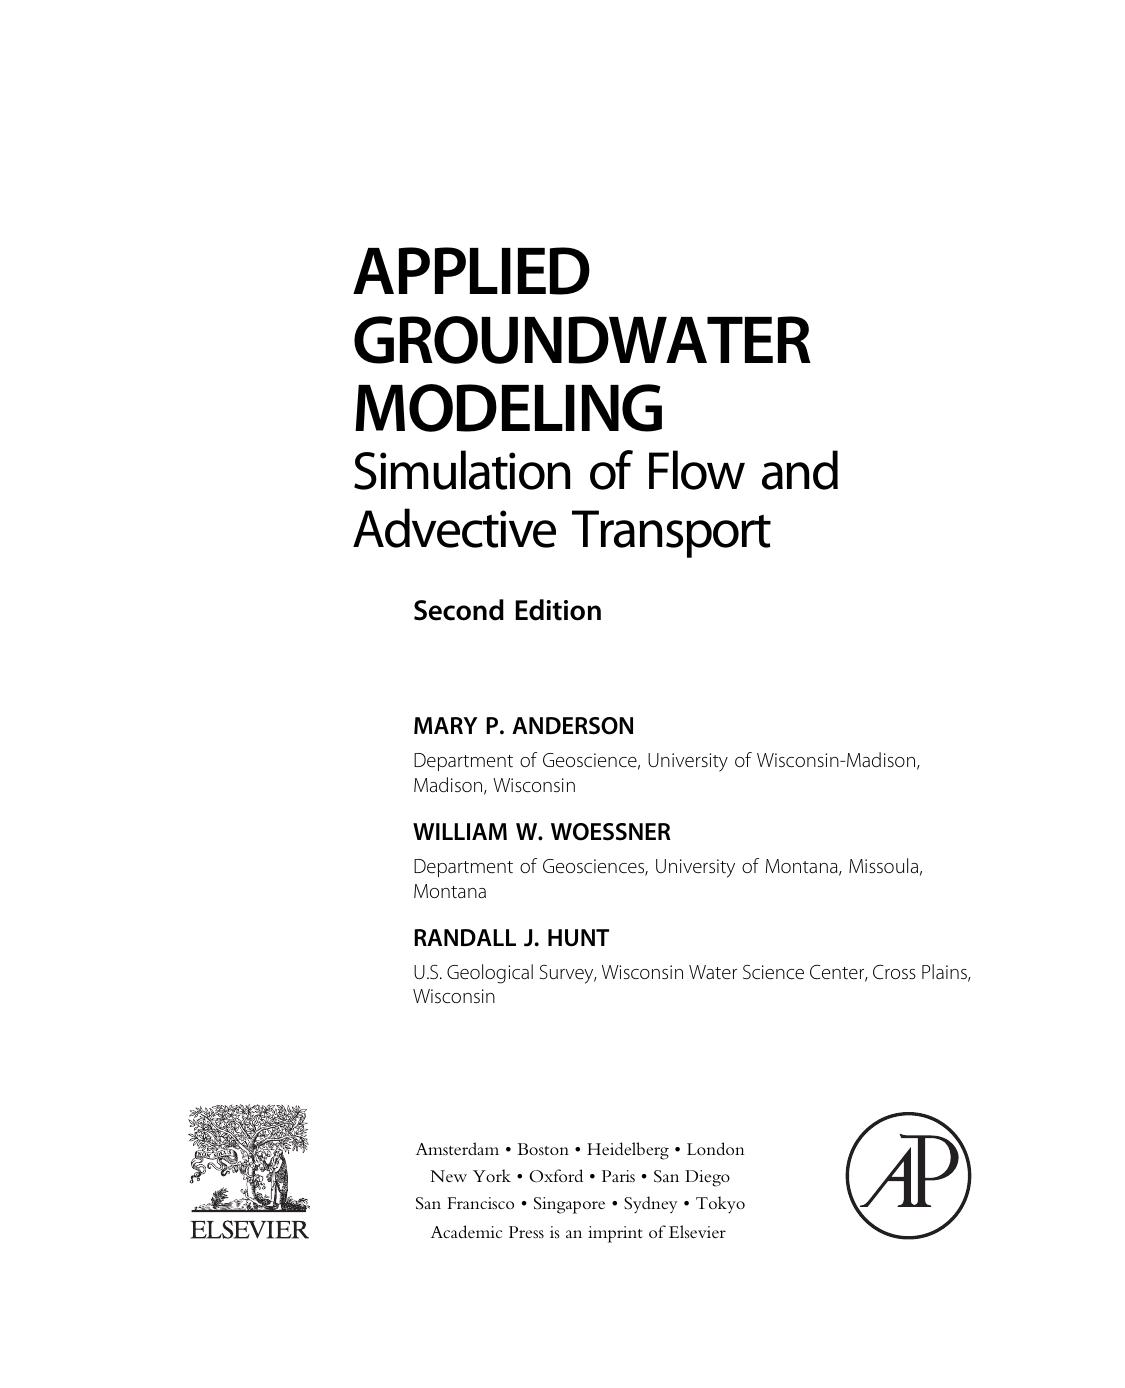 Applied Groundwater Modeling, Simulation of Flow and Advective Transport 2015